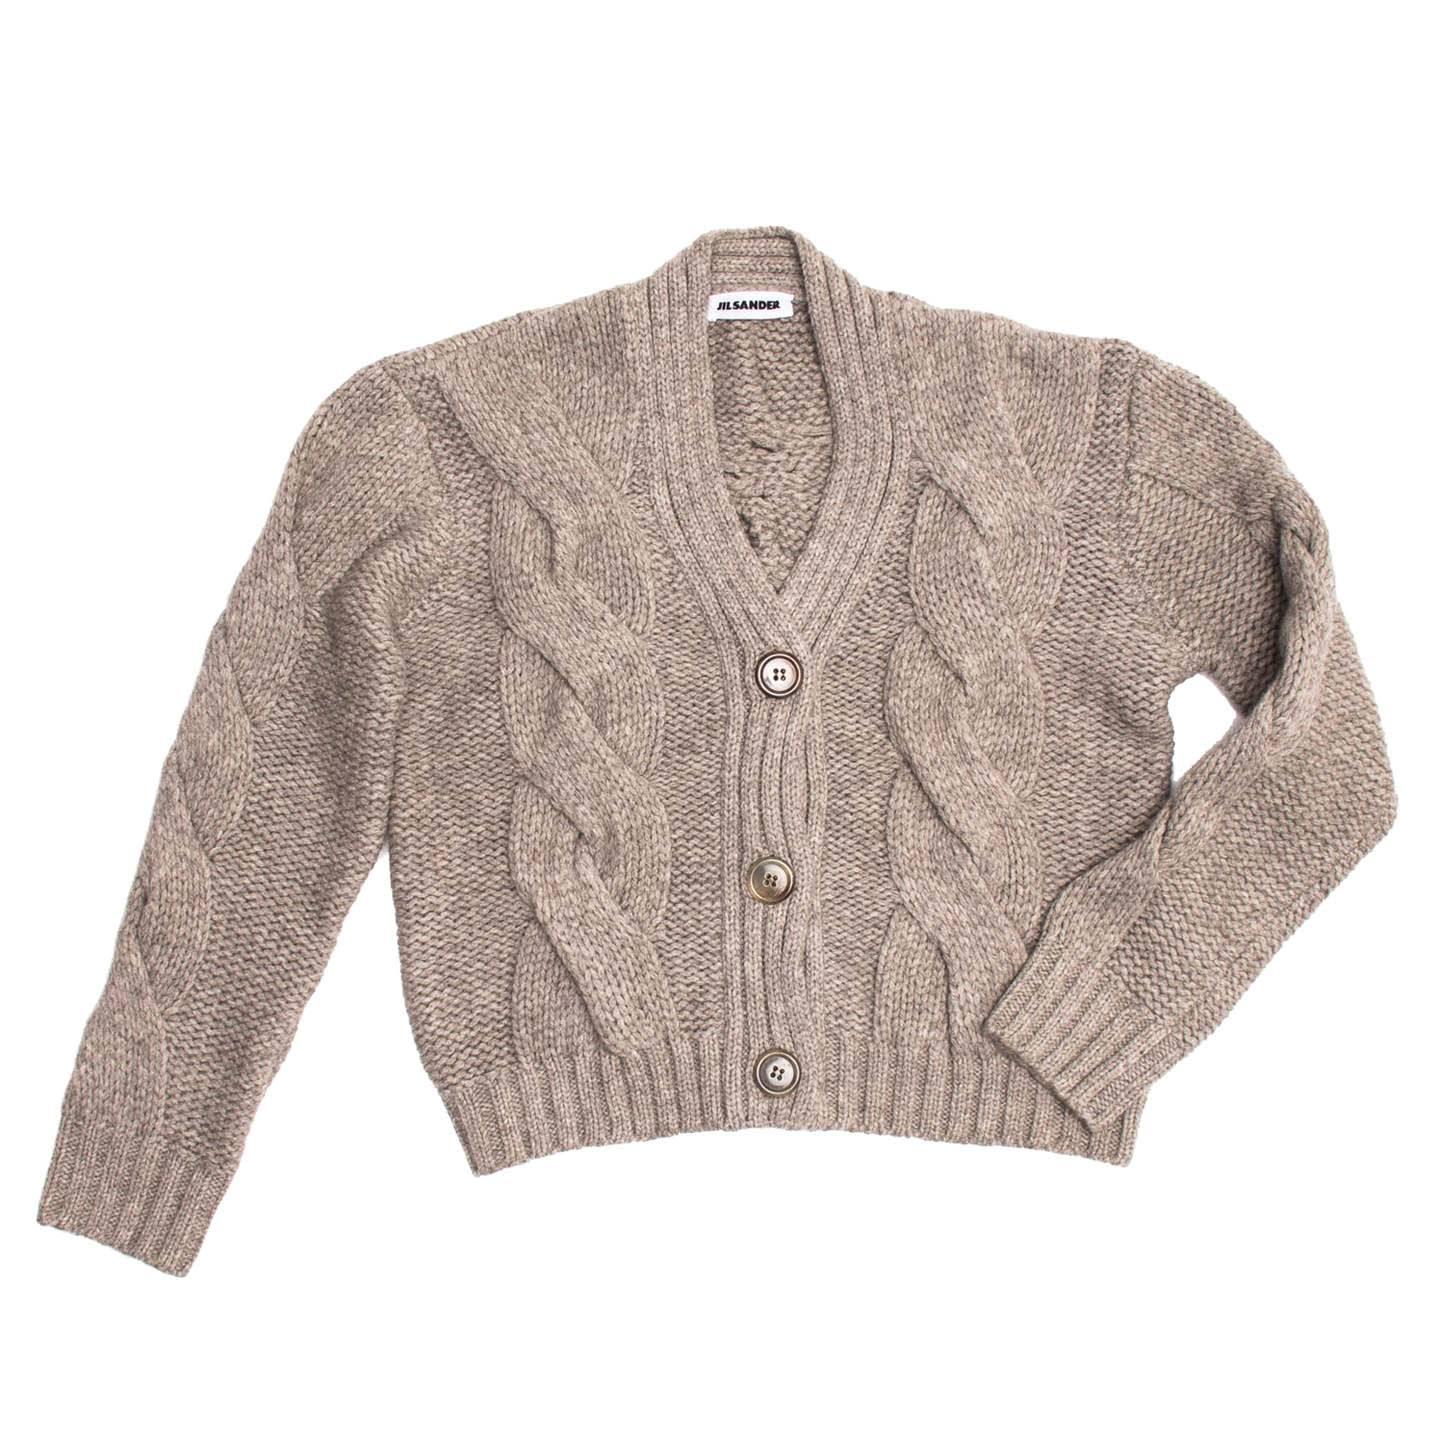 Heather grey/taupe cable knit cropped cardigan with 3/4 sleeves.

Size  38 French sizing

Condition  Excellent: worn a few times